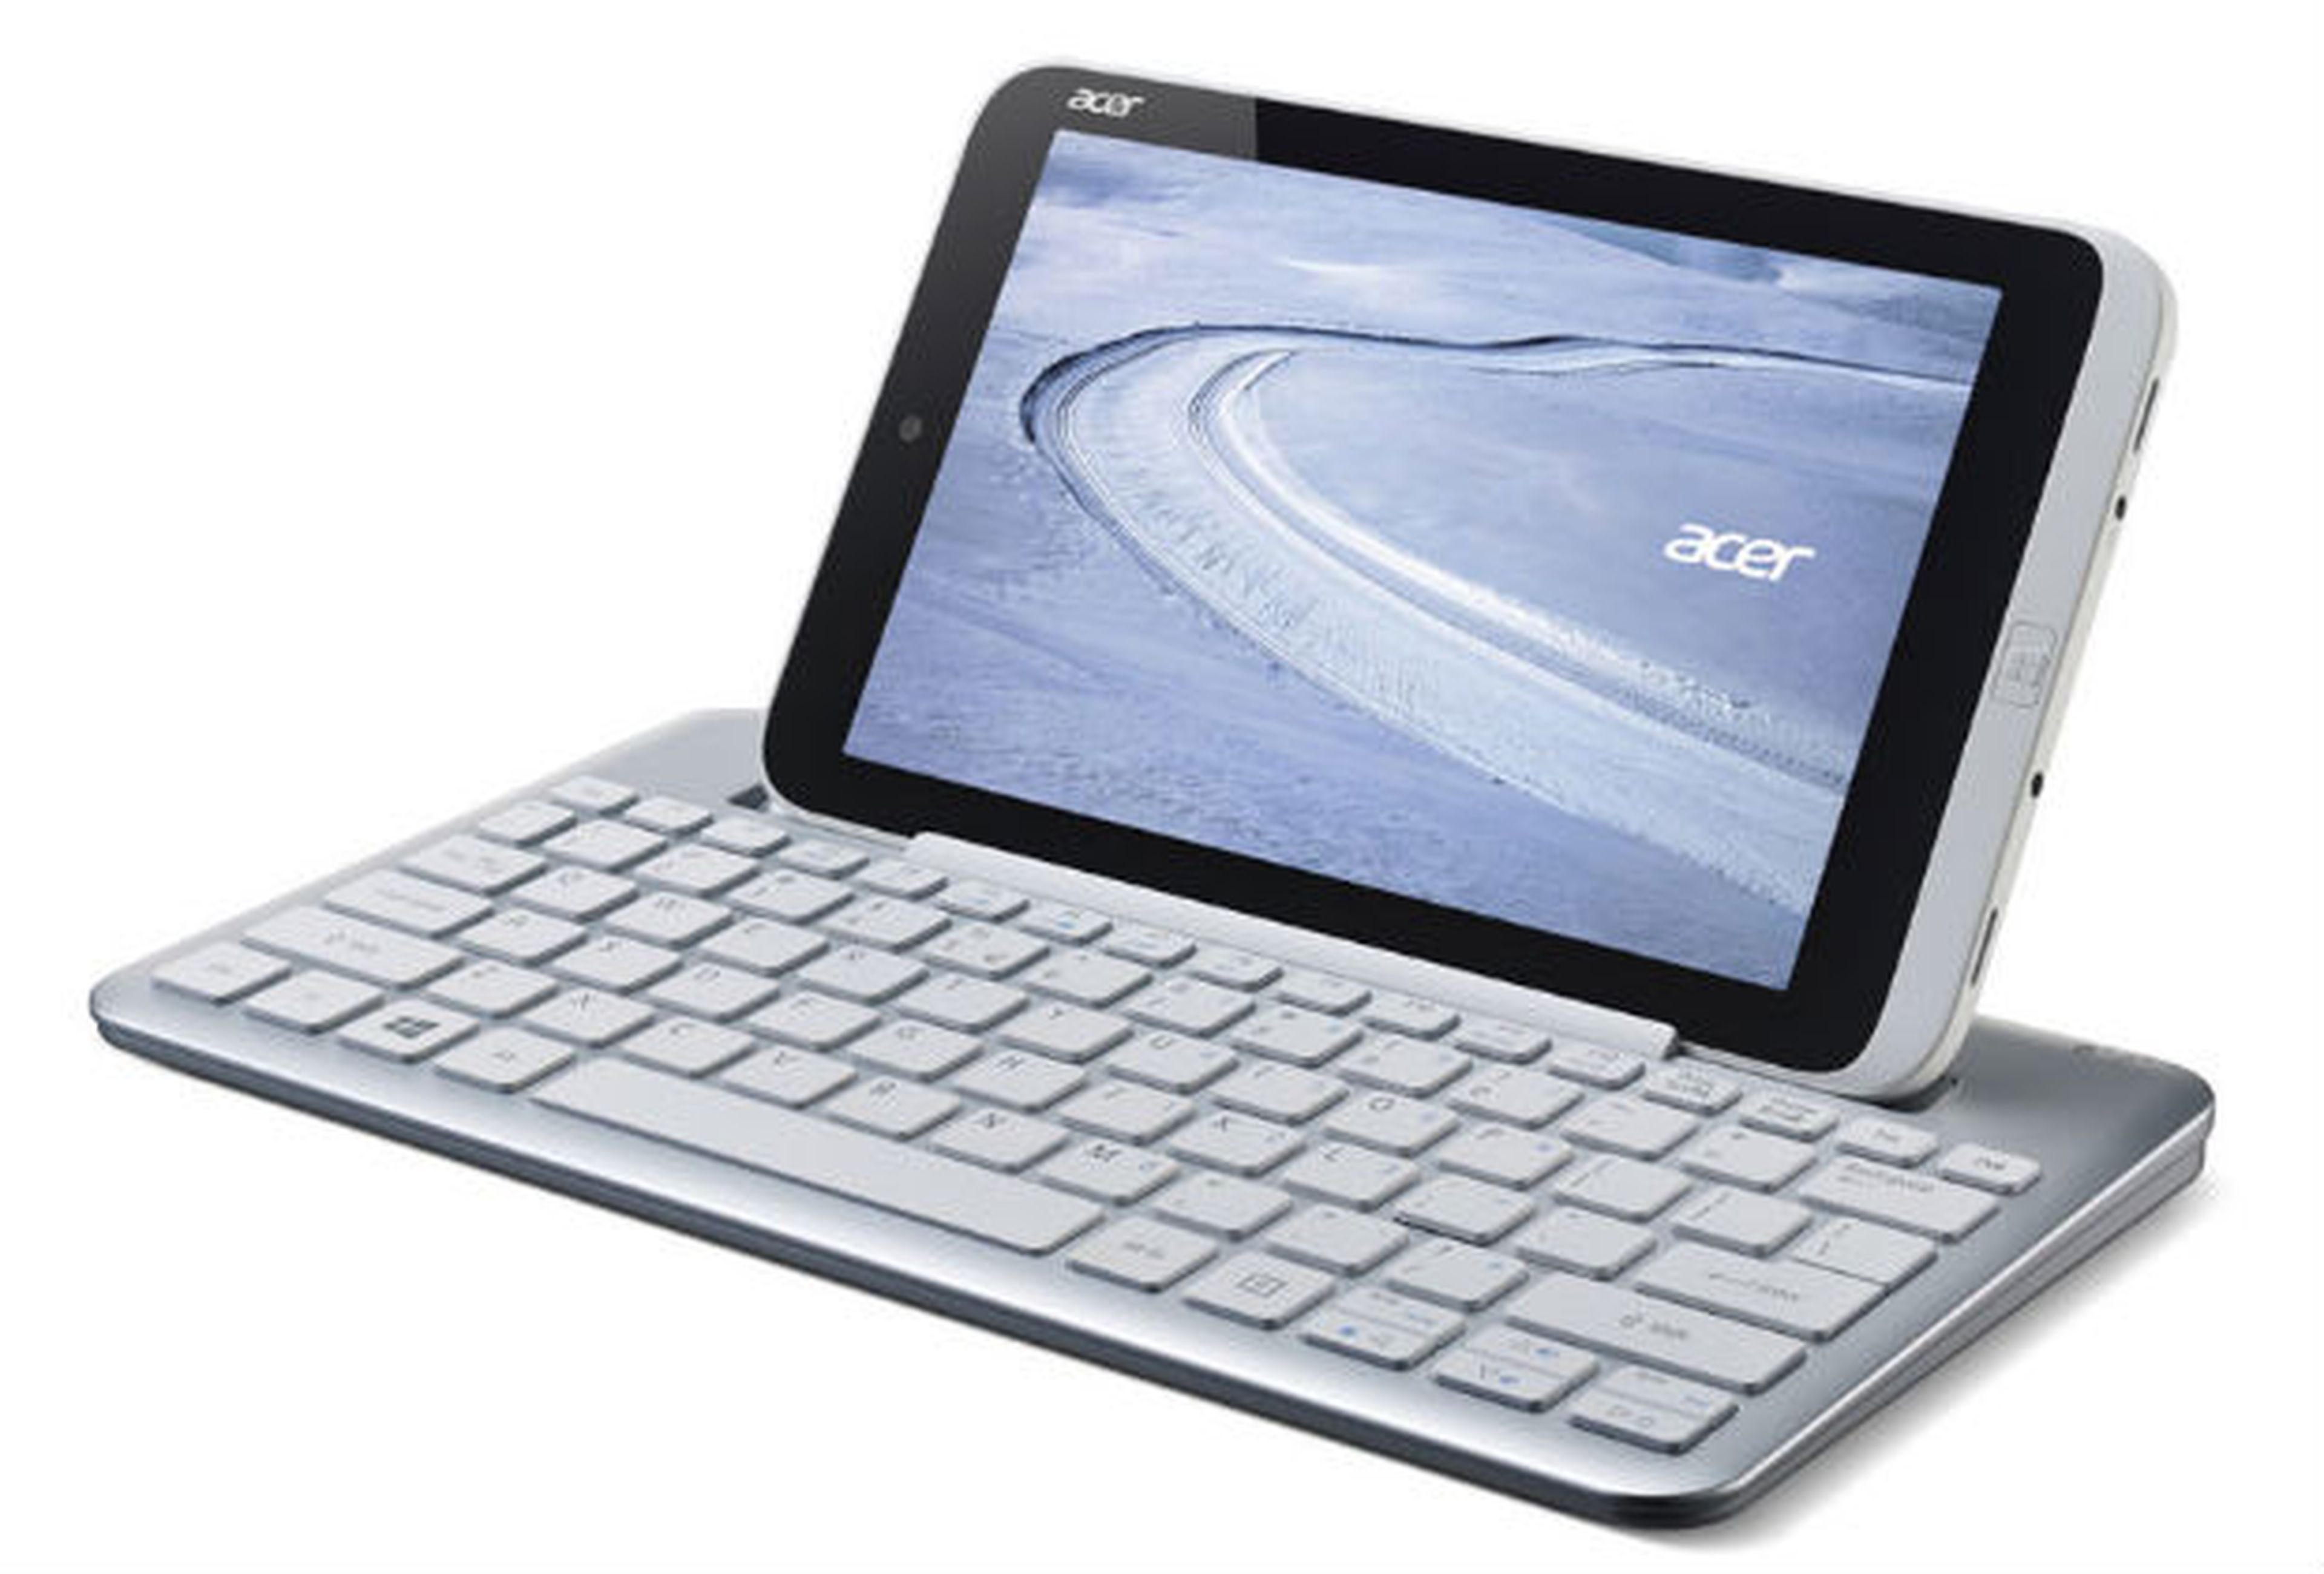 Acer Iconia W3